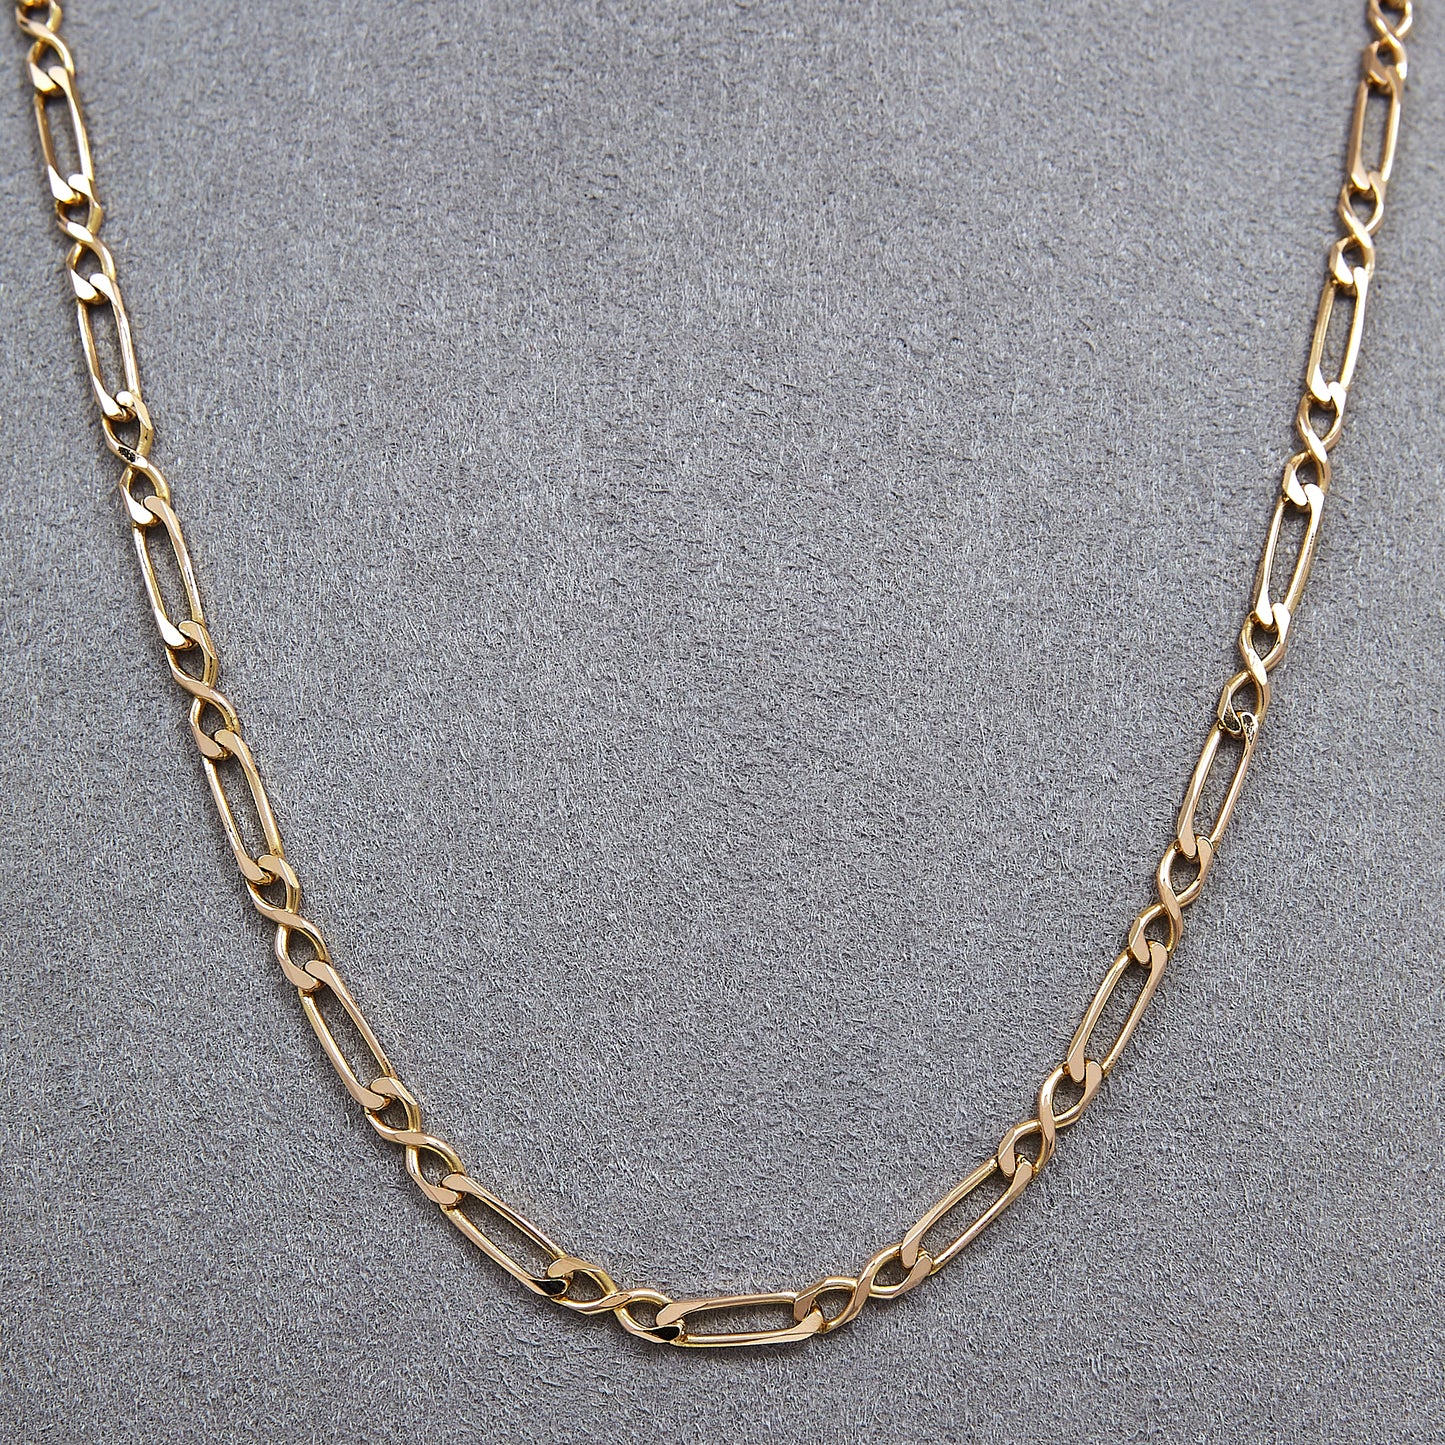 Pre-Owned 9ct Yellow Gold 2&1 Figaro Link Necklace